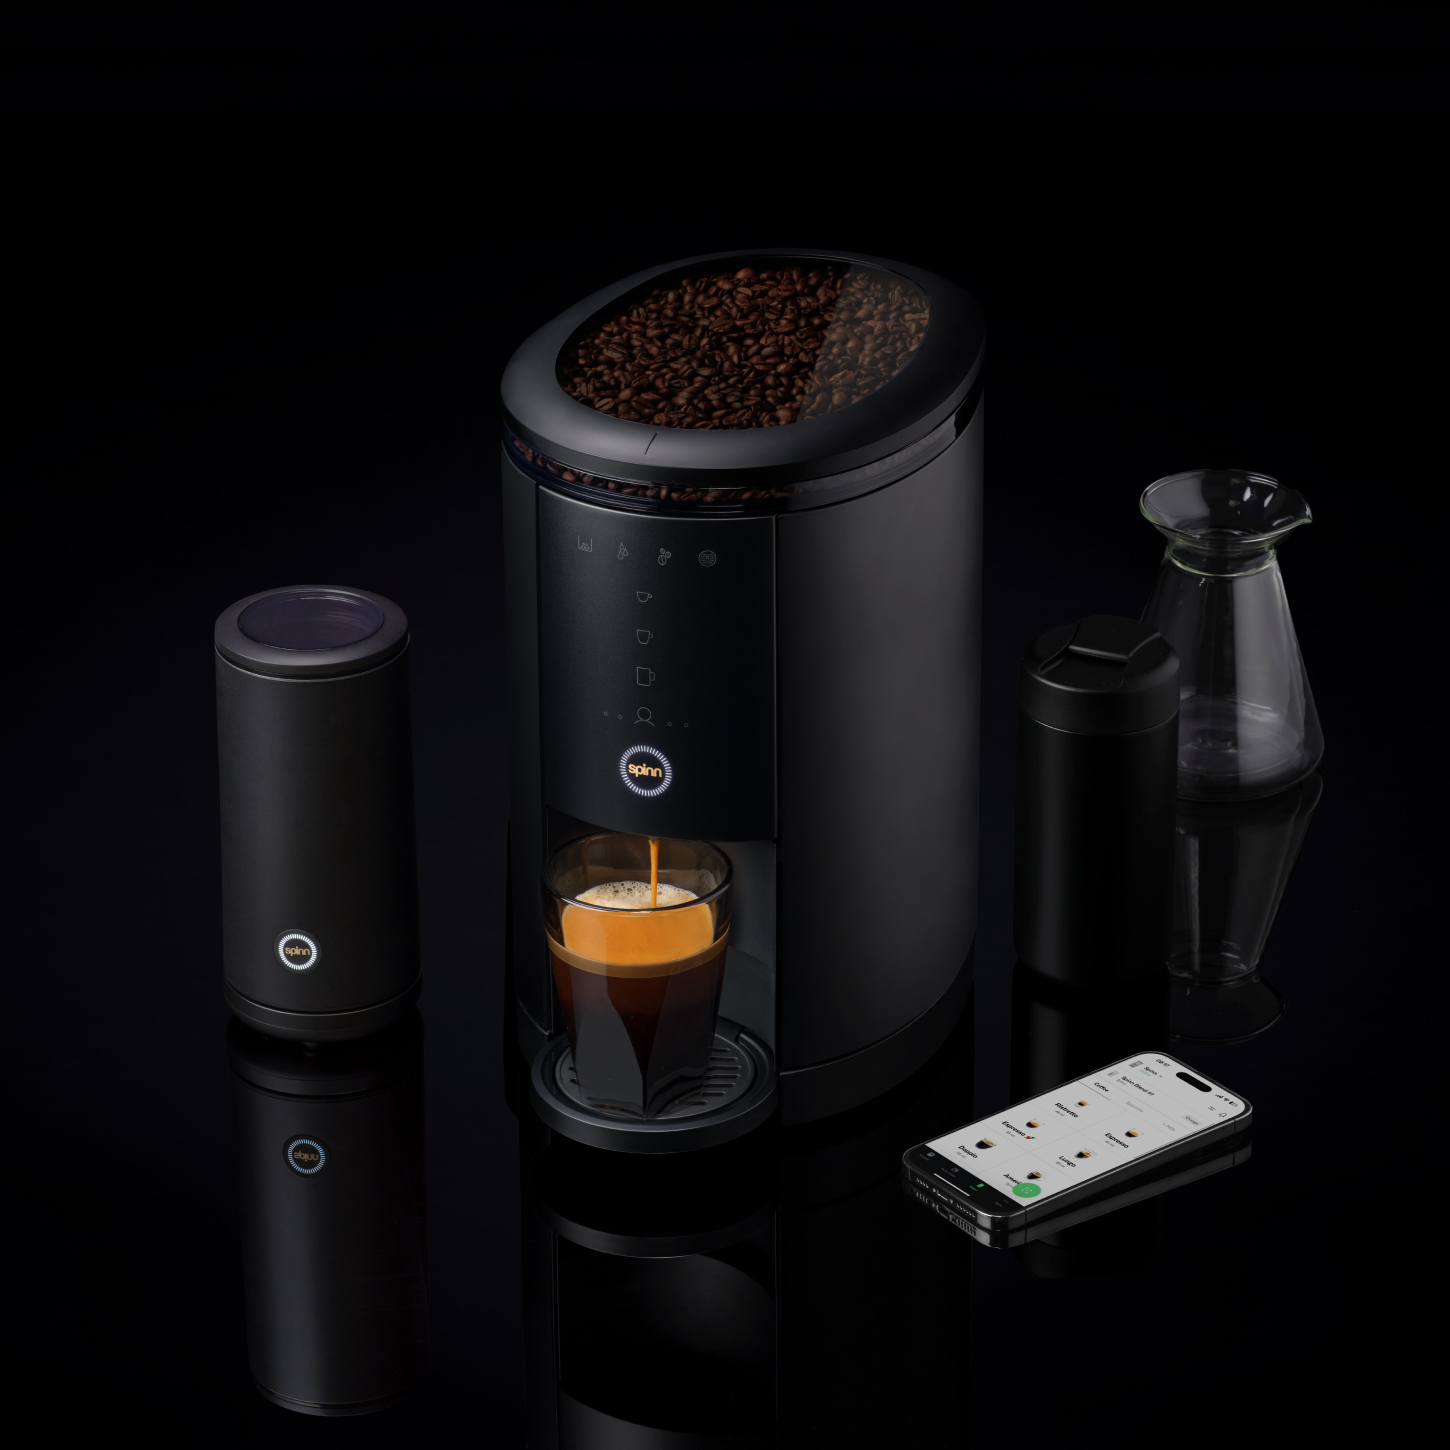 The Spinn Coffee Maker Is Still MIA For Early Backers